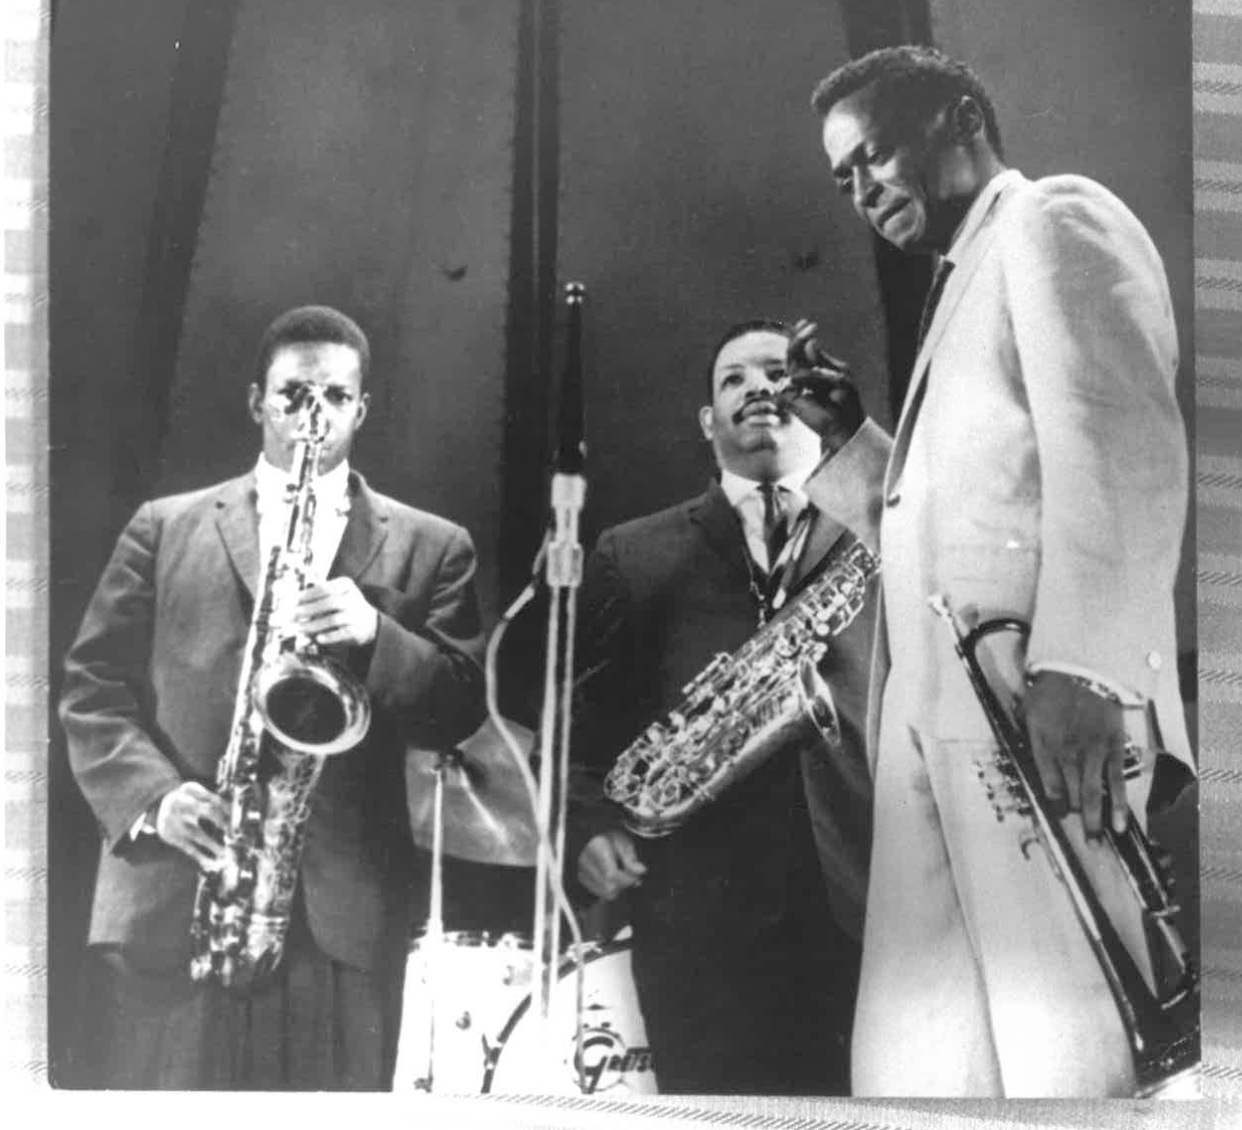 John Coltrane (left), Julian "Cannonball" Adderley (center), and Miles Davis (right) appear in a Democrat file photo copied in 1991 courtesy of the Black Archives and Research Museum at Florida A&M University. 